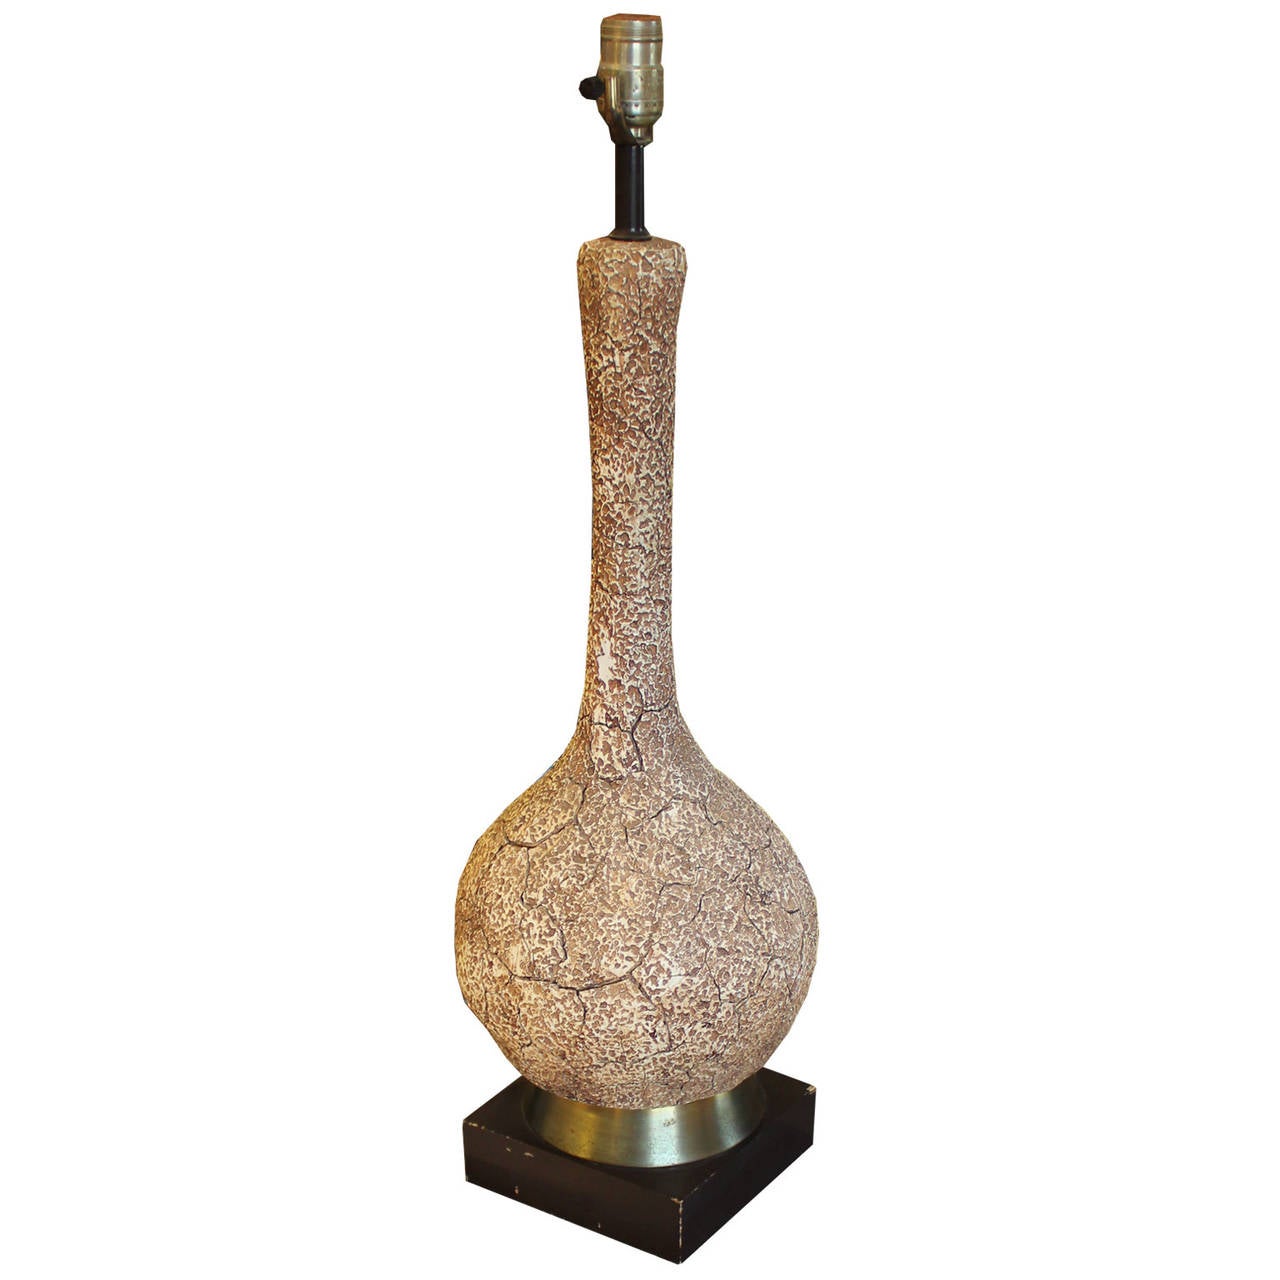 Beautiful and unusual coral style table lamp that sits atop a brass base.